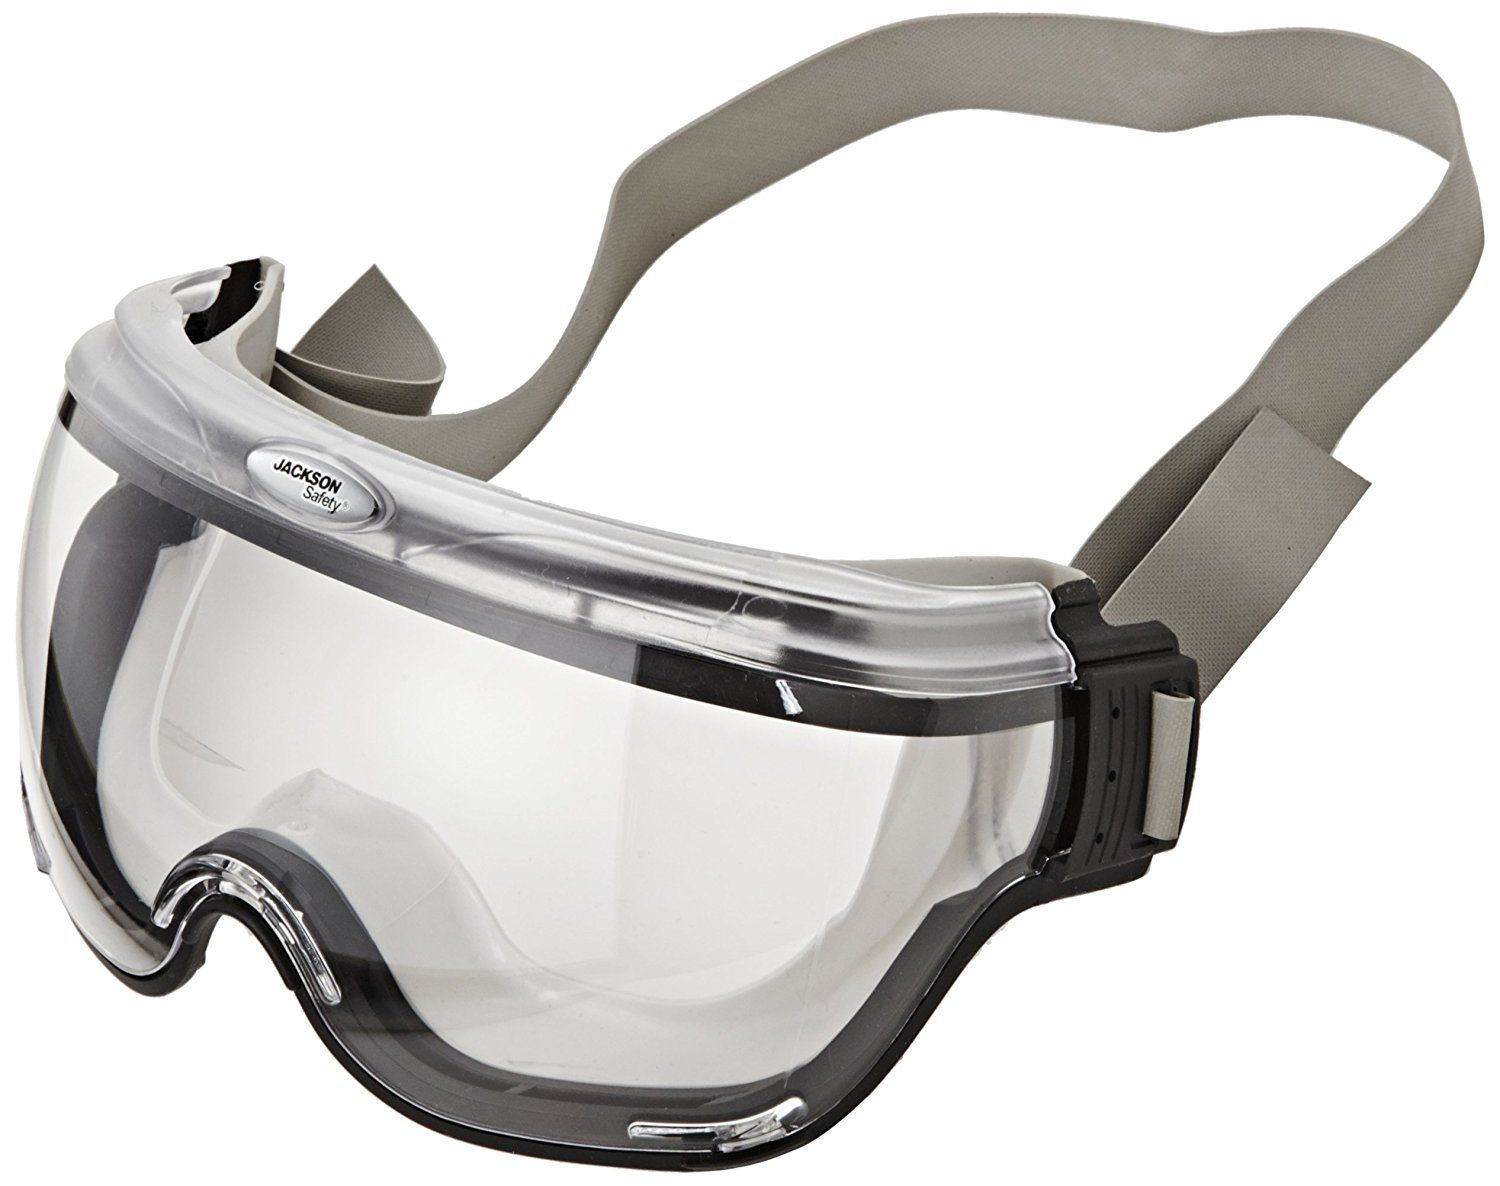 Deluxe Safety Goggles With Strap